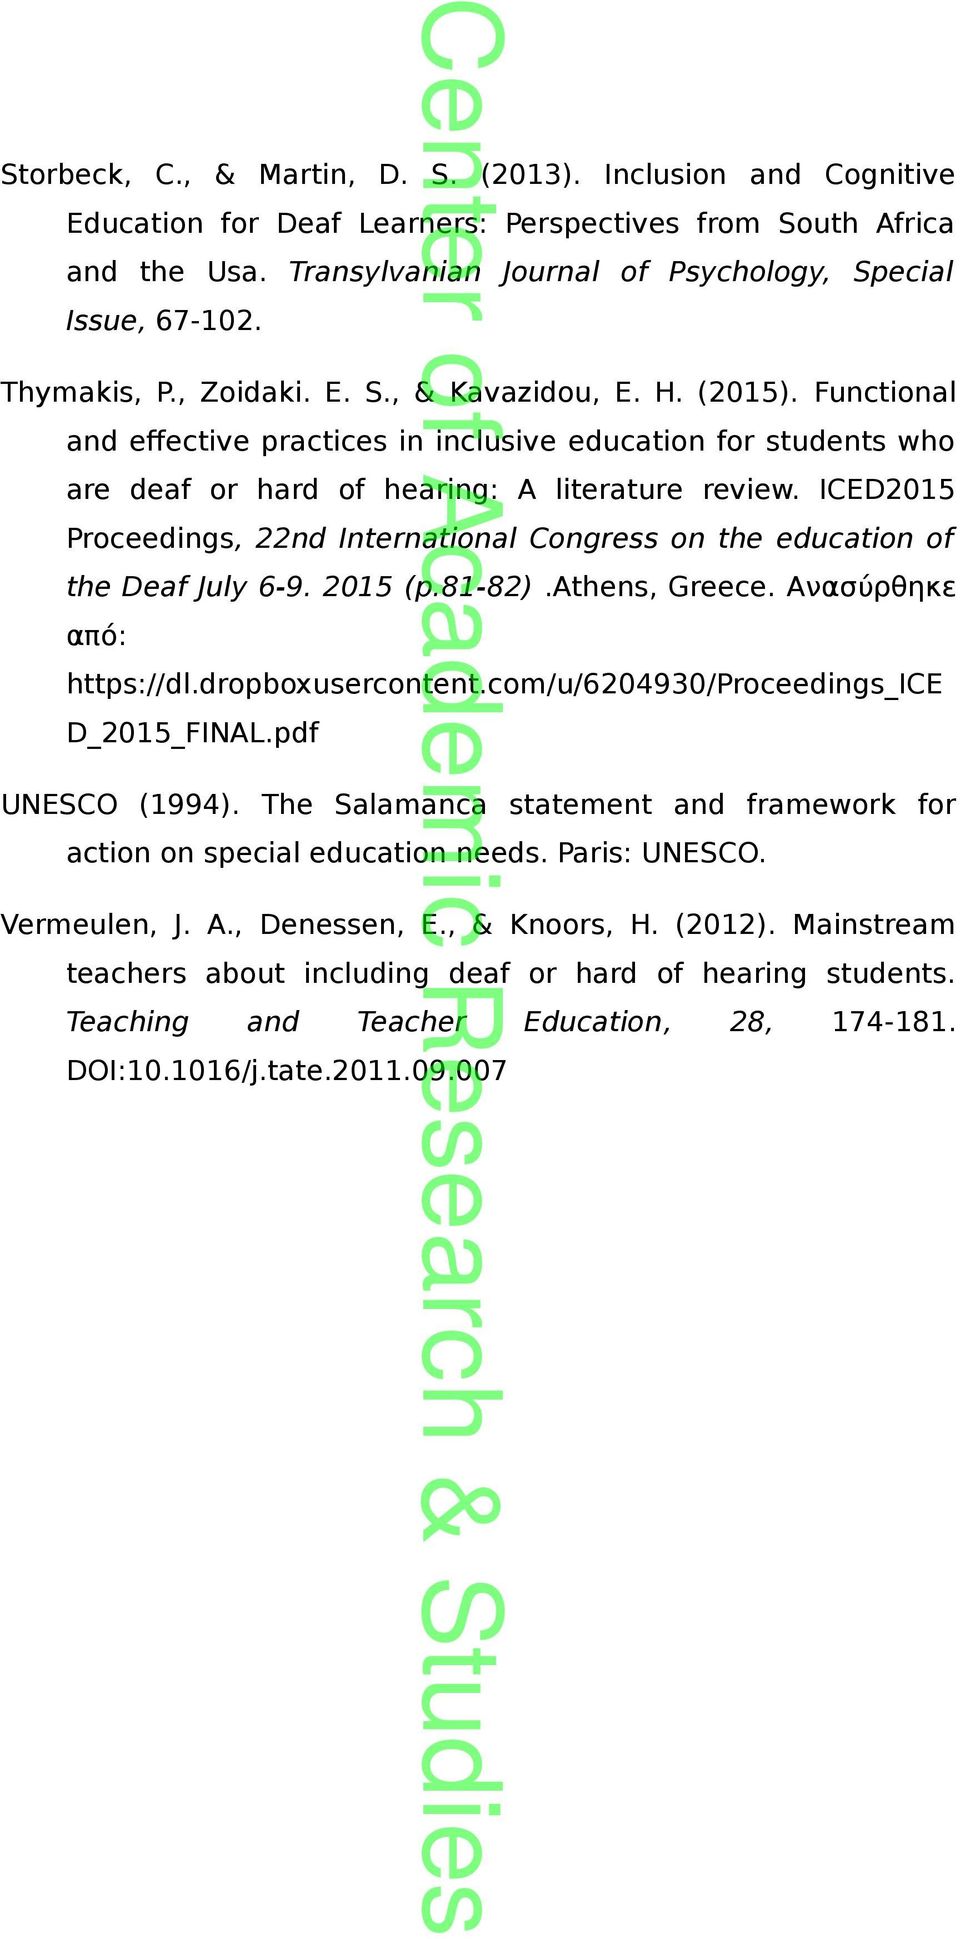 ICED2015 Proceedings, 22nd International Congress on the education of the Deaf July 6-9. 2015 (p.81-82).athens, Greece. Ανασύρθηκε από: https://dl.dropboxusercontent.